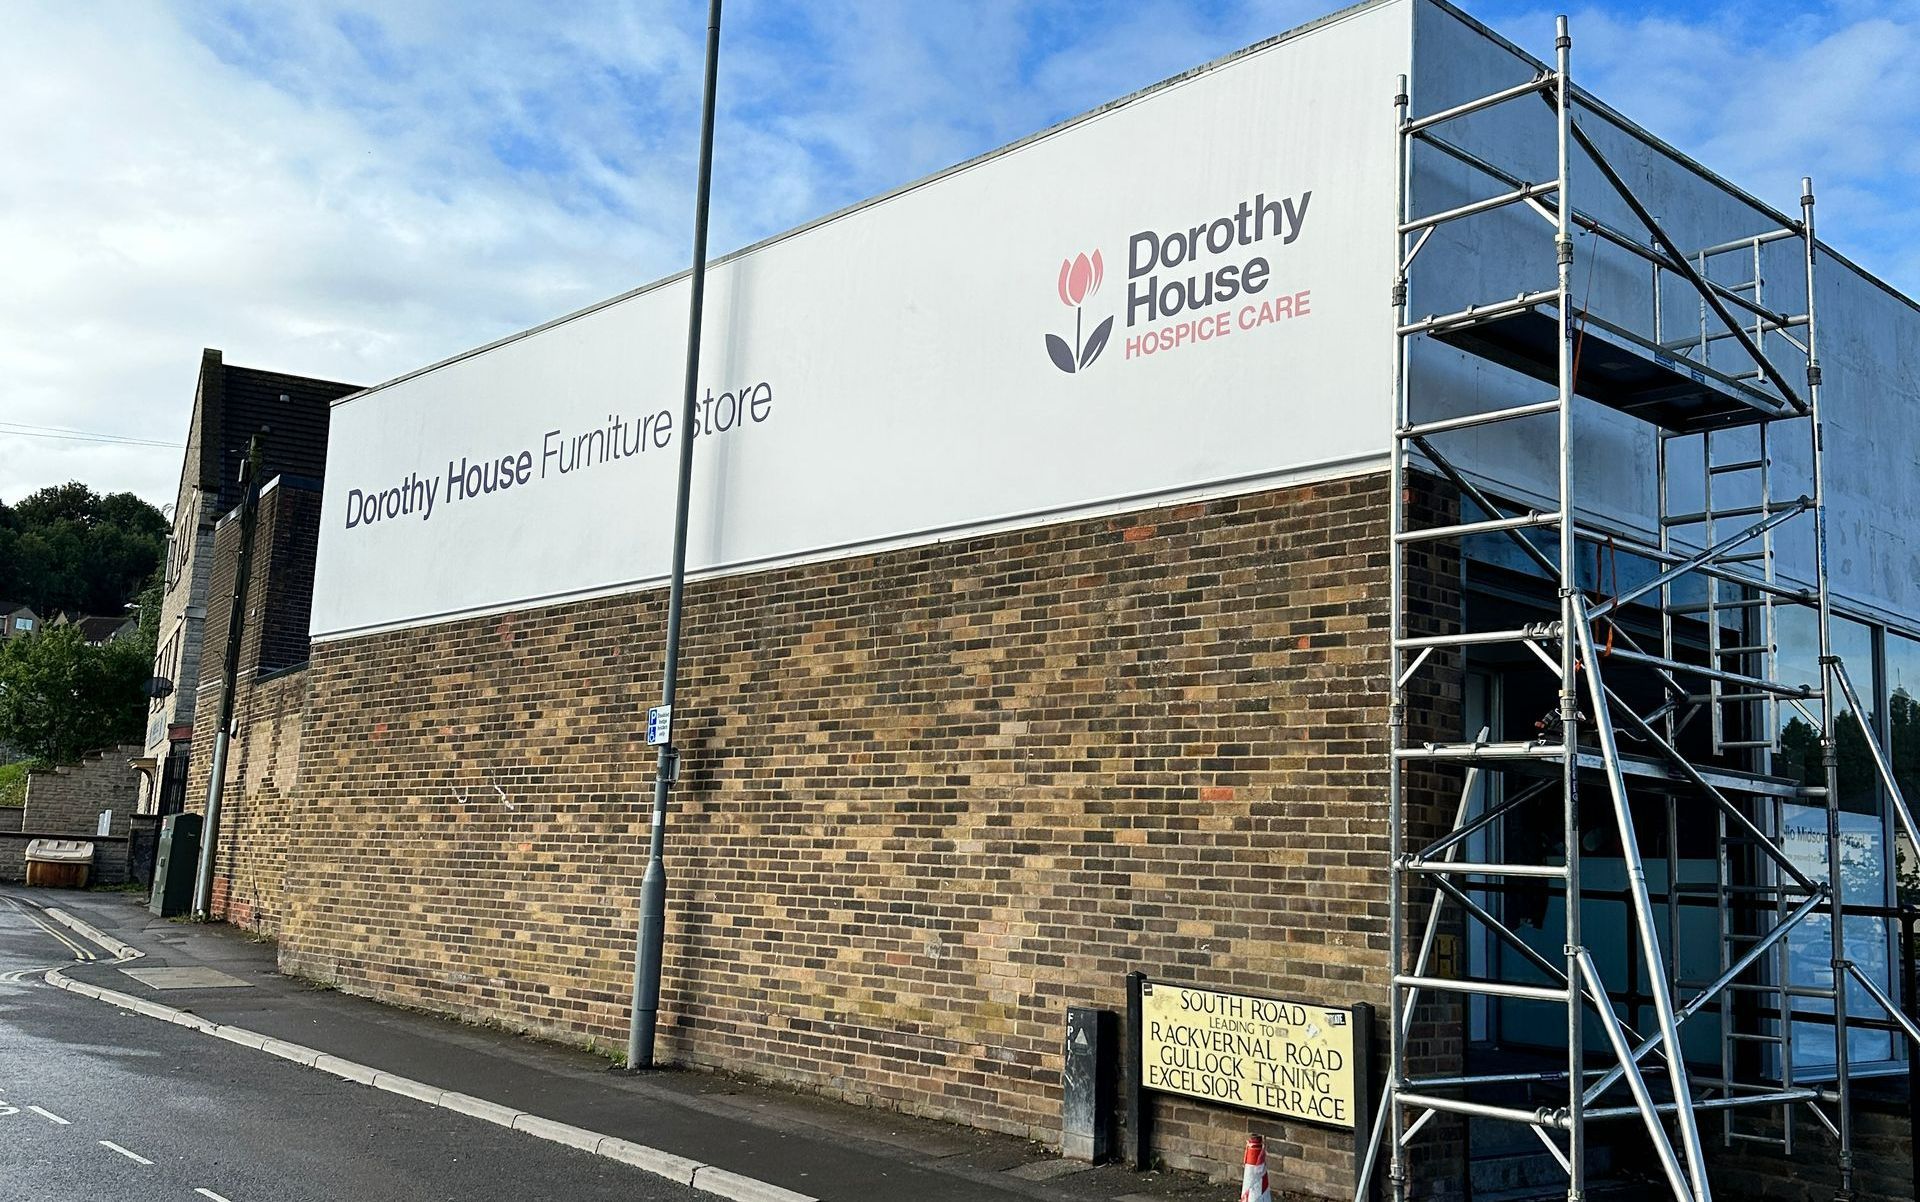 A large billboard on the side of a building that says dorothy house